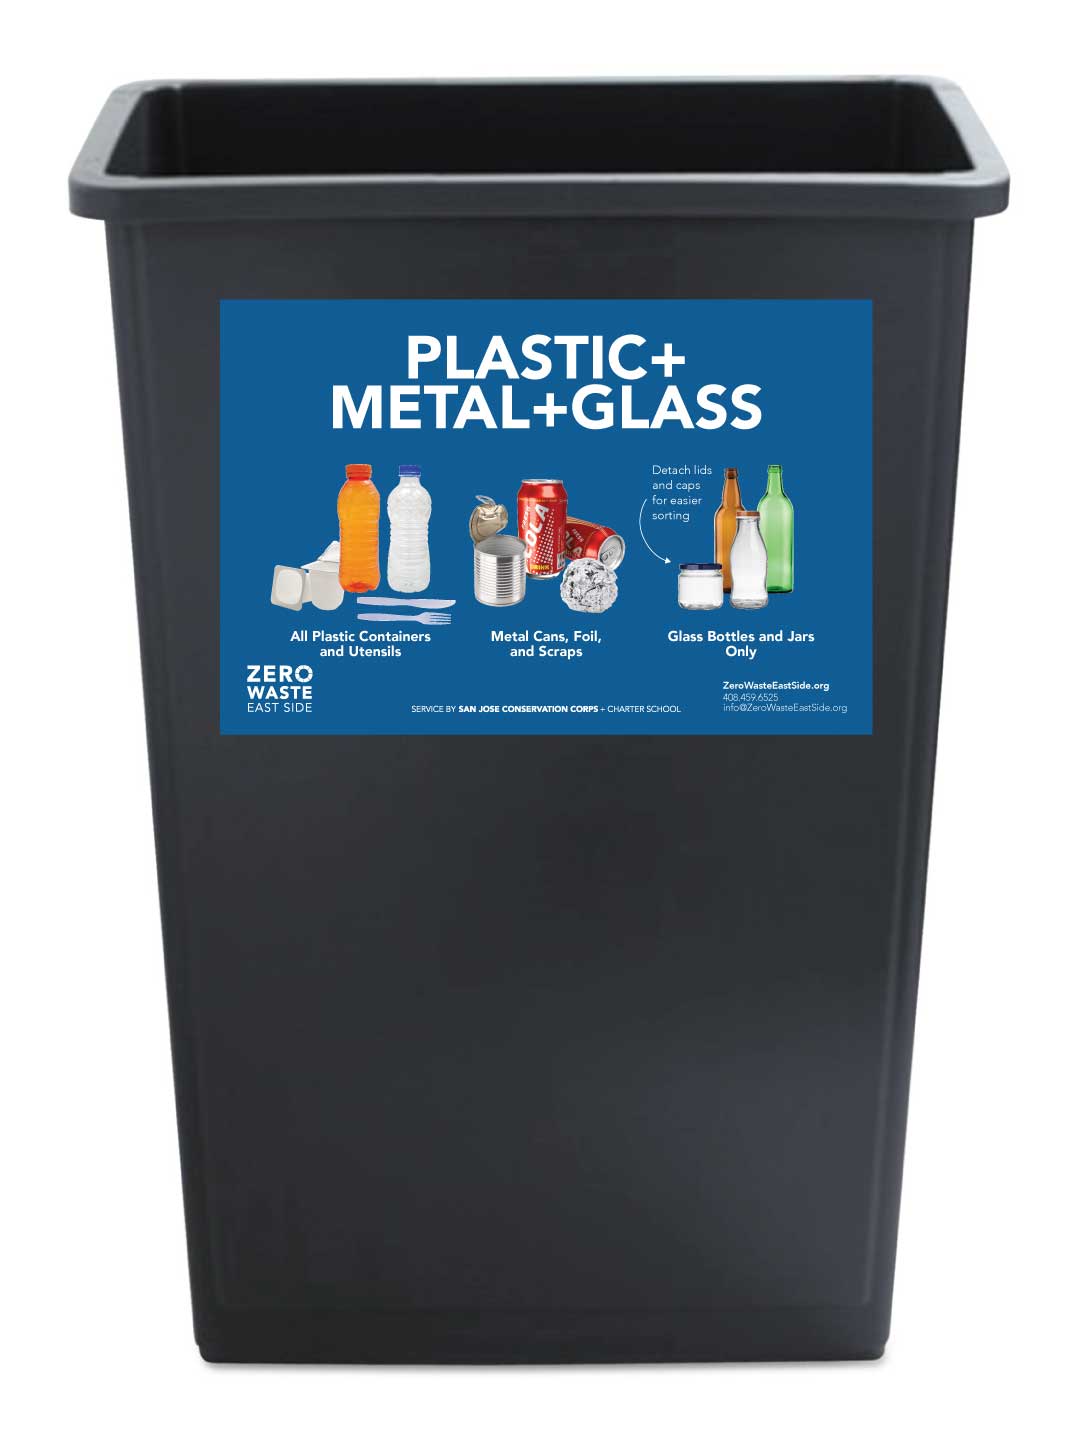 Receptacle Label for Plastic + Metal + Glass